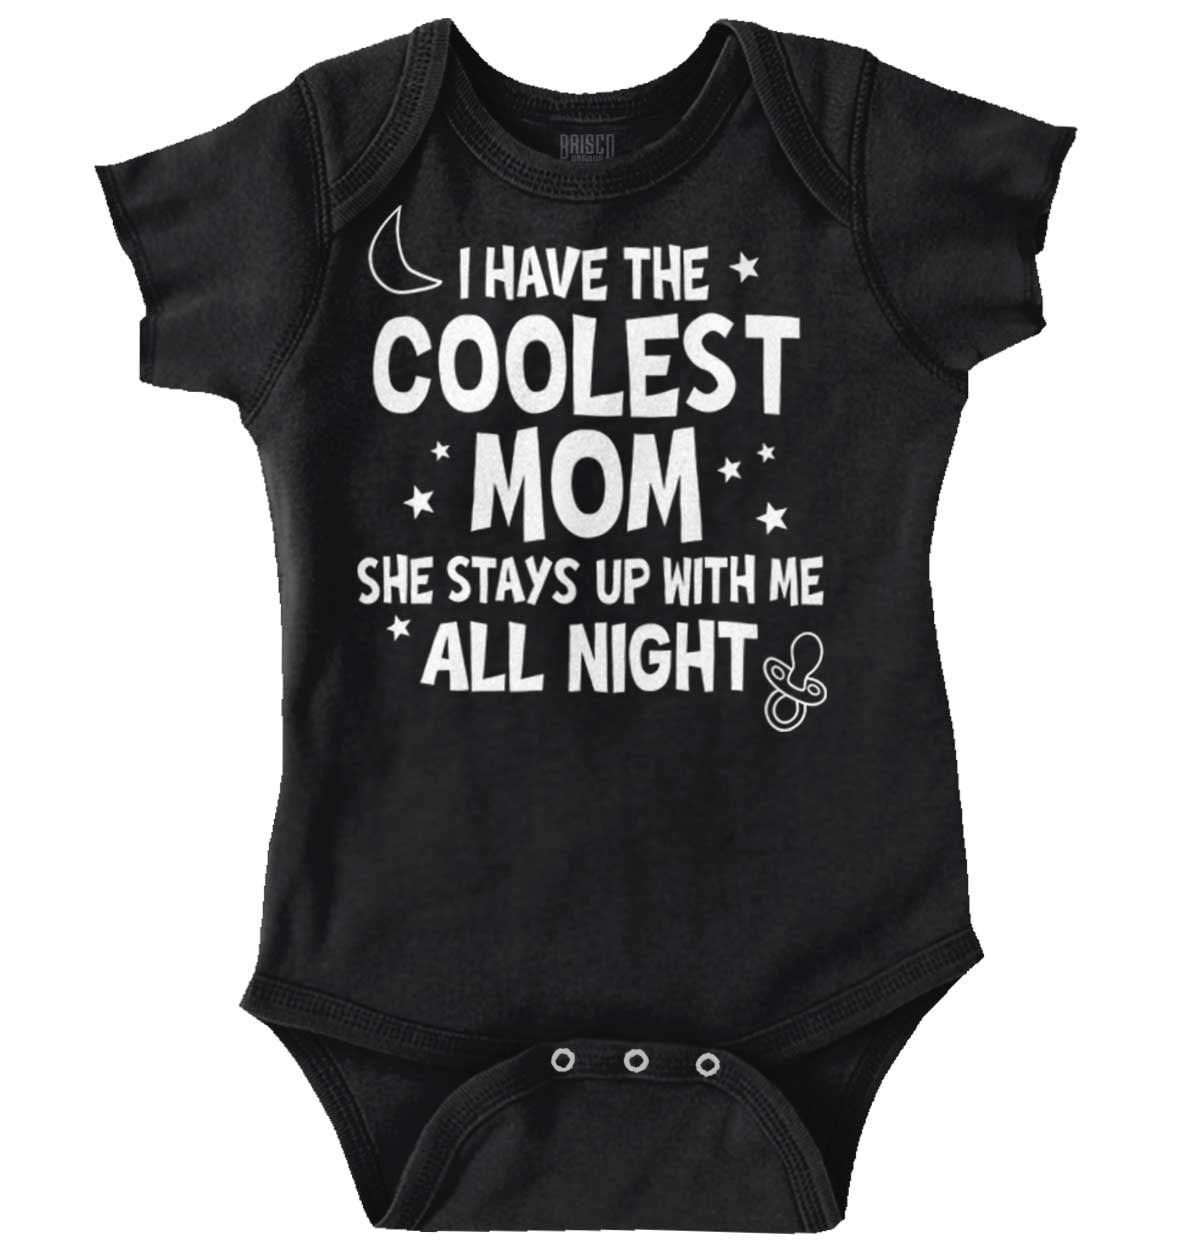 I Came From NUTTIN’ baby onesie